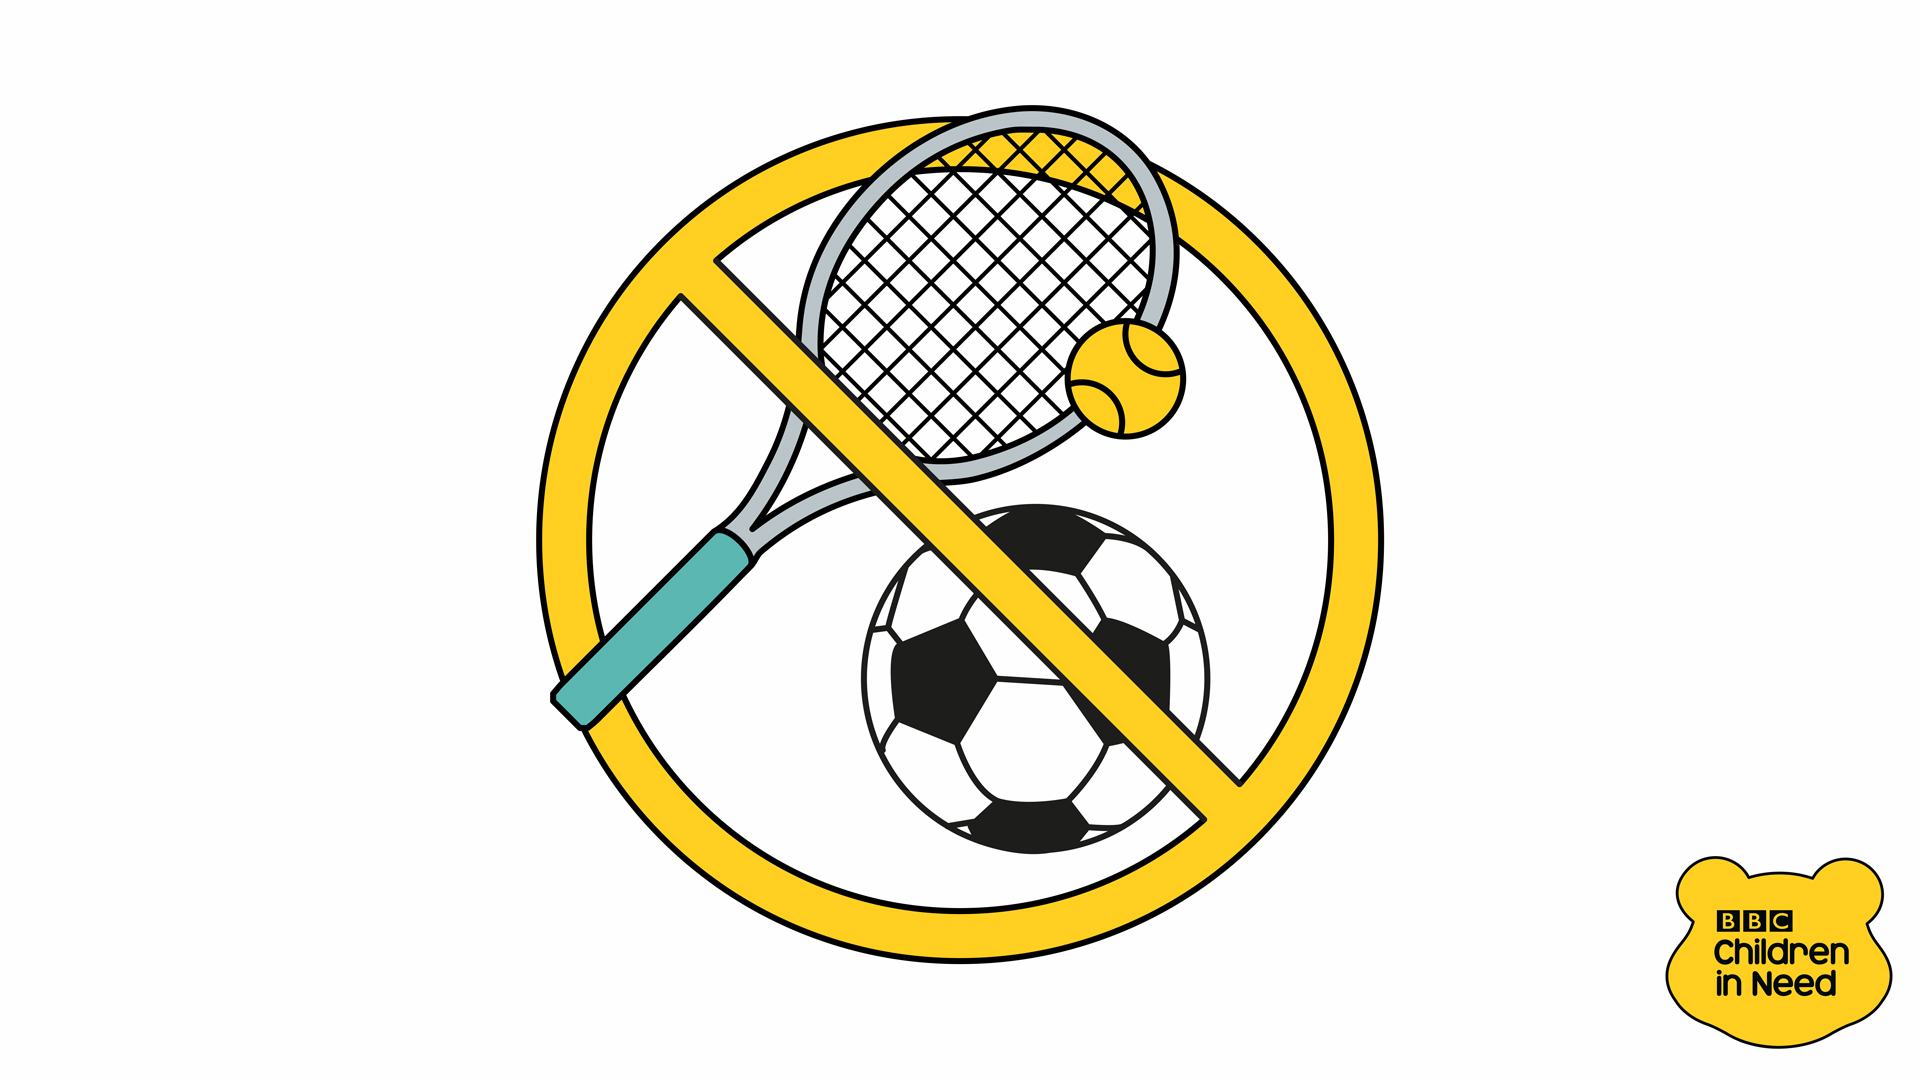 A graphic showing sports equipment inside a 'not allowed' symbol